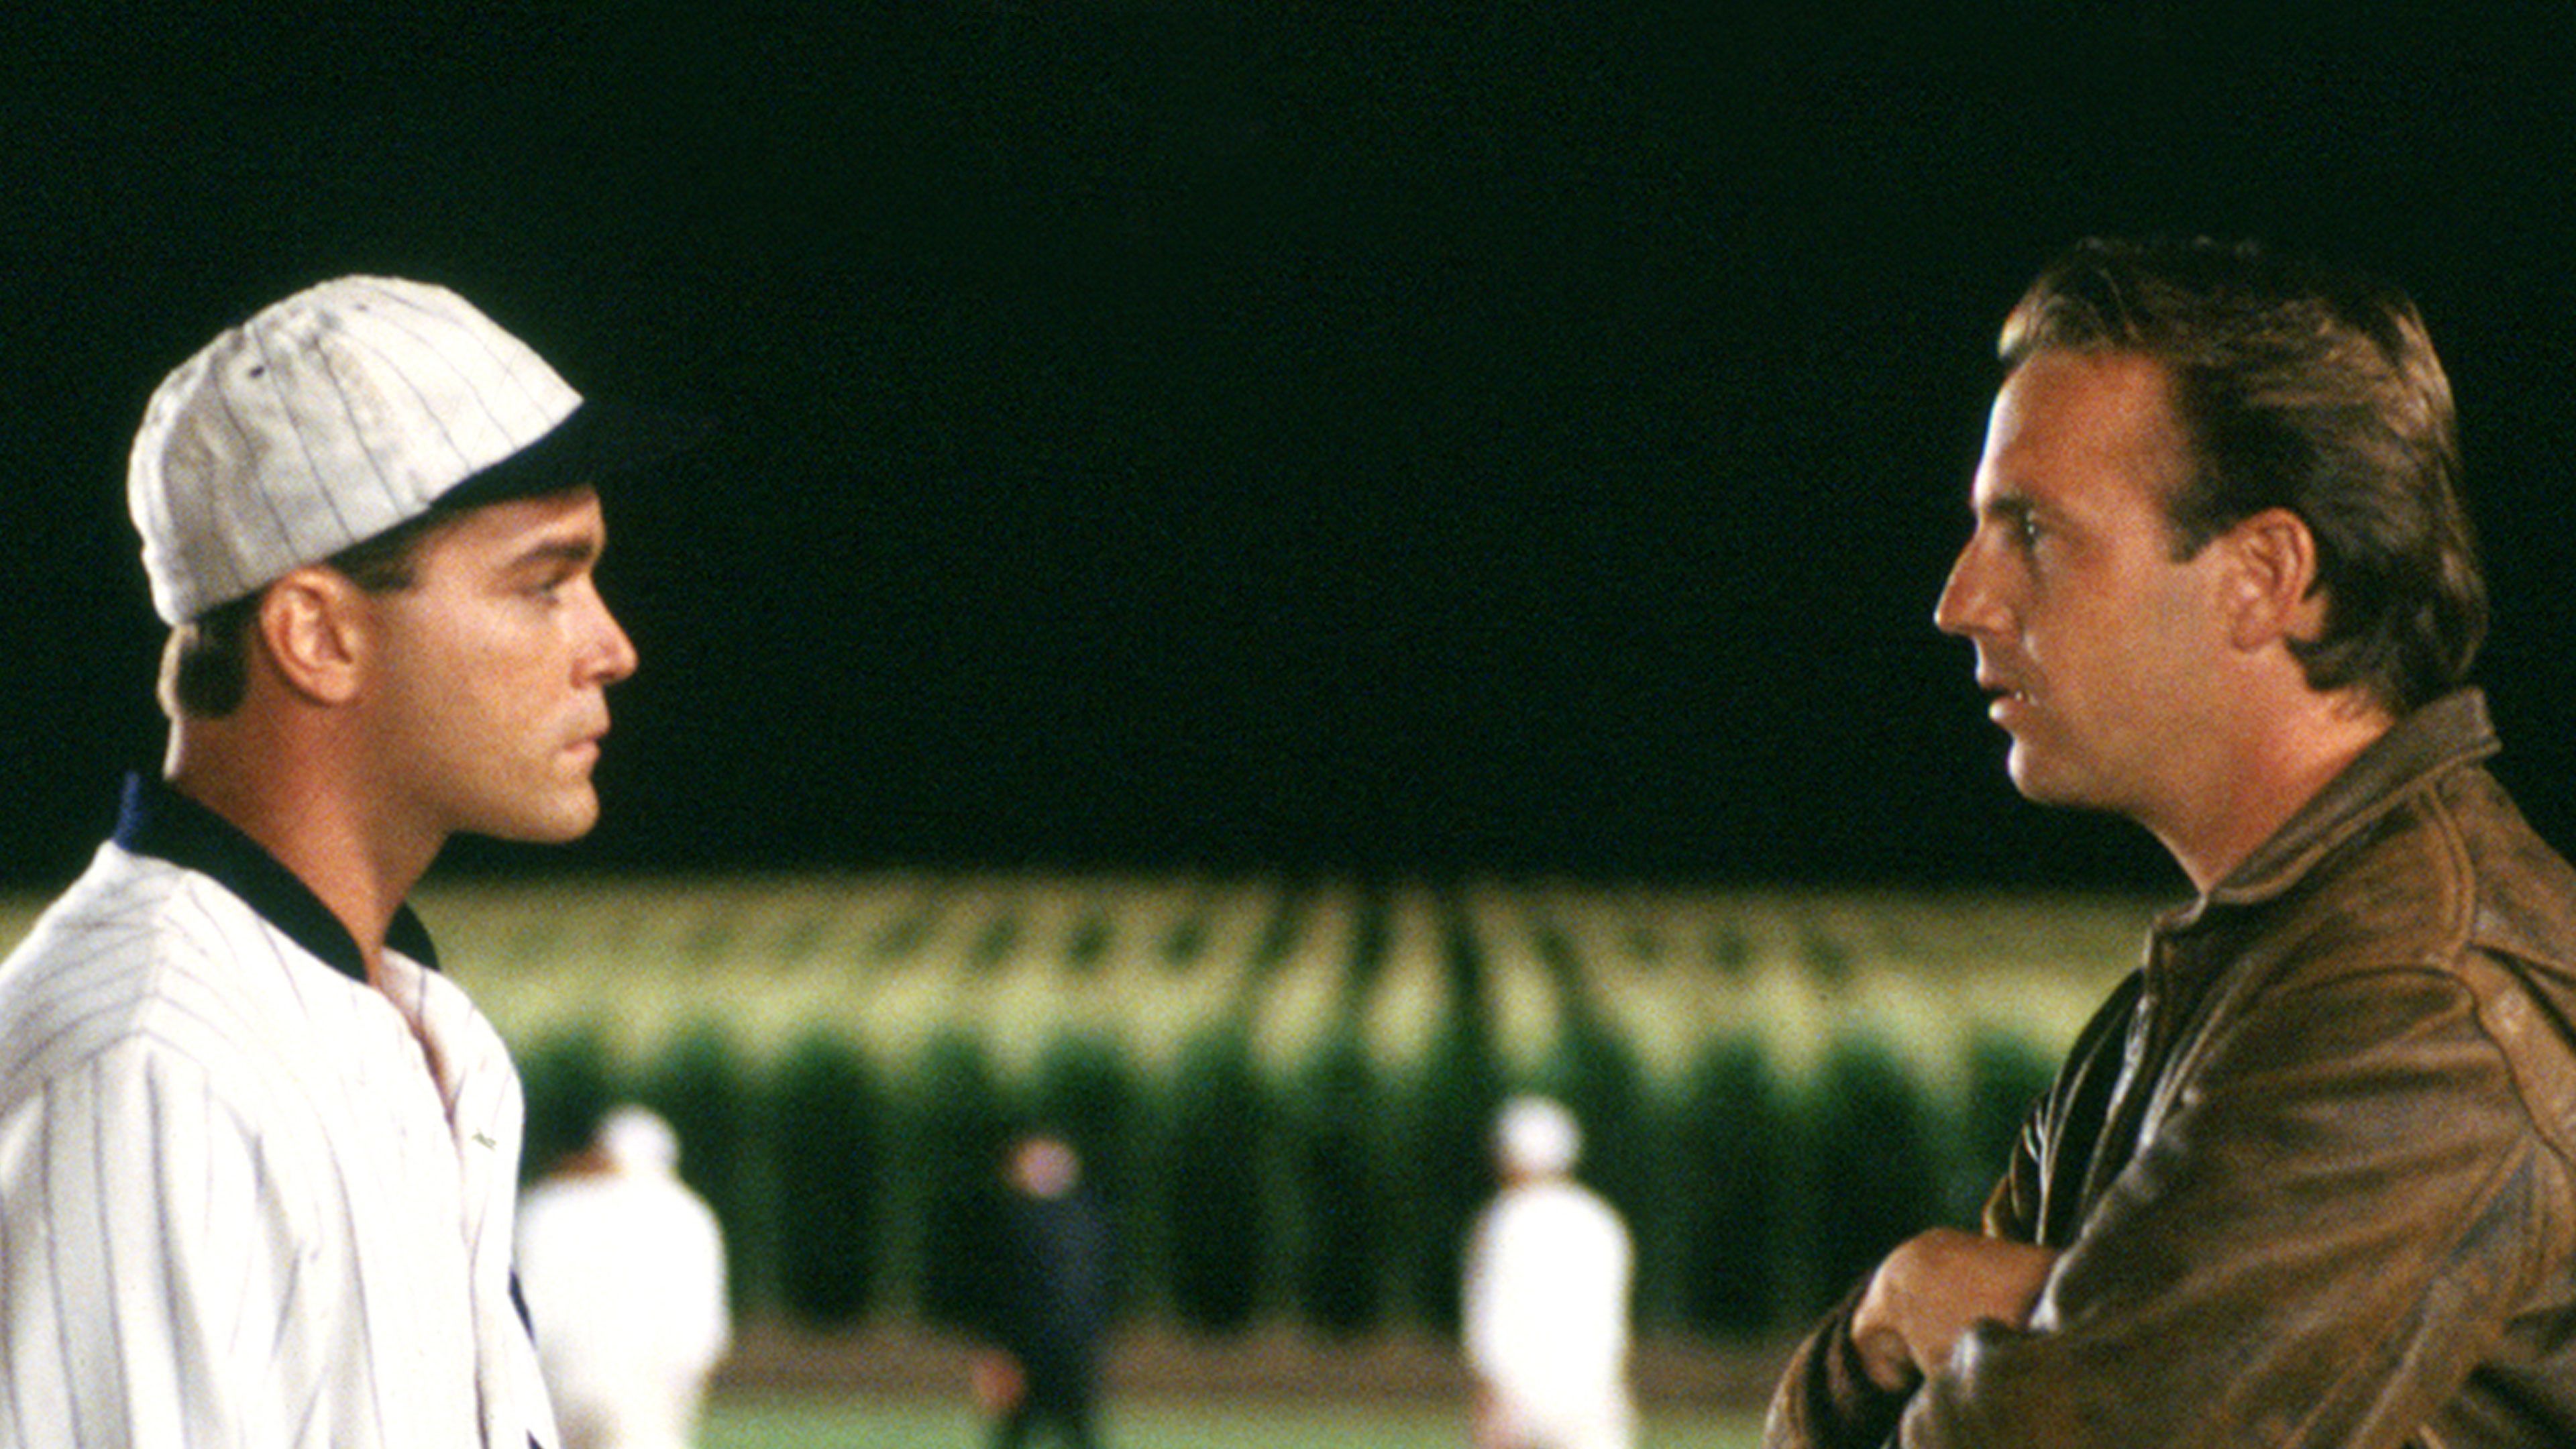 field of dreams movie images